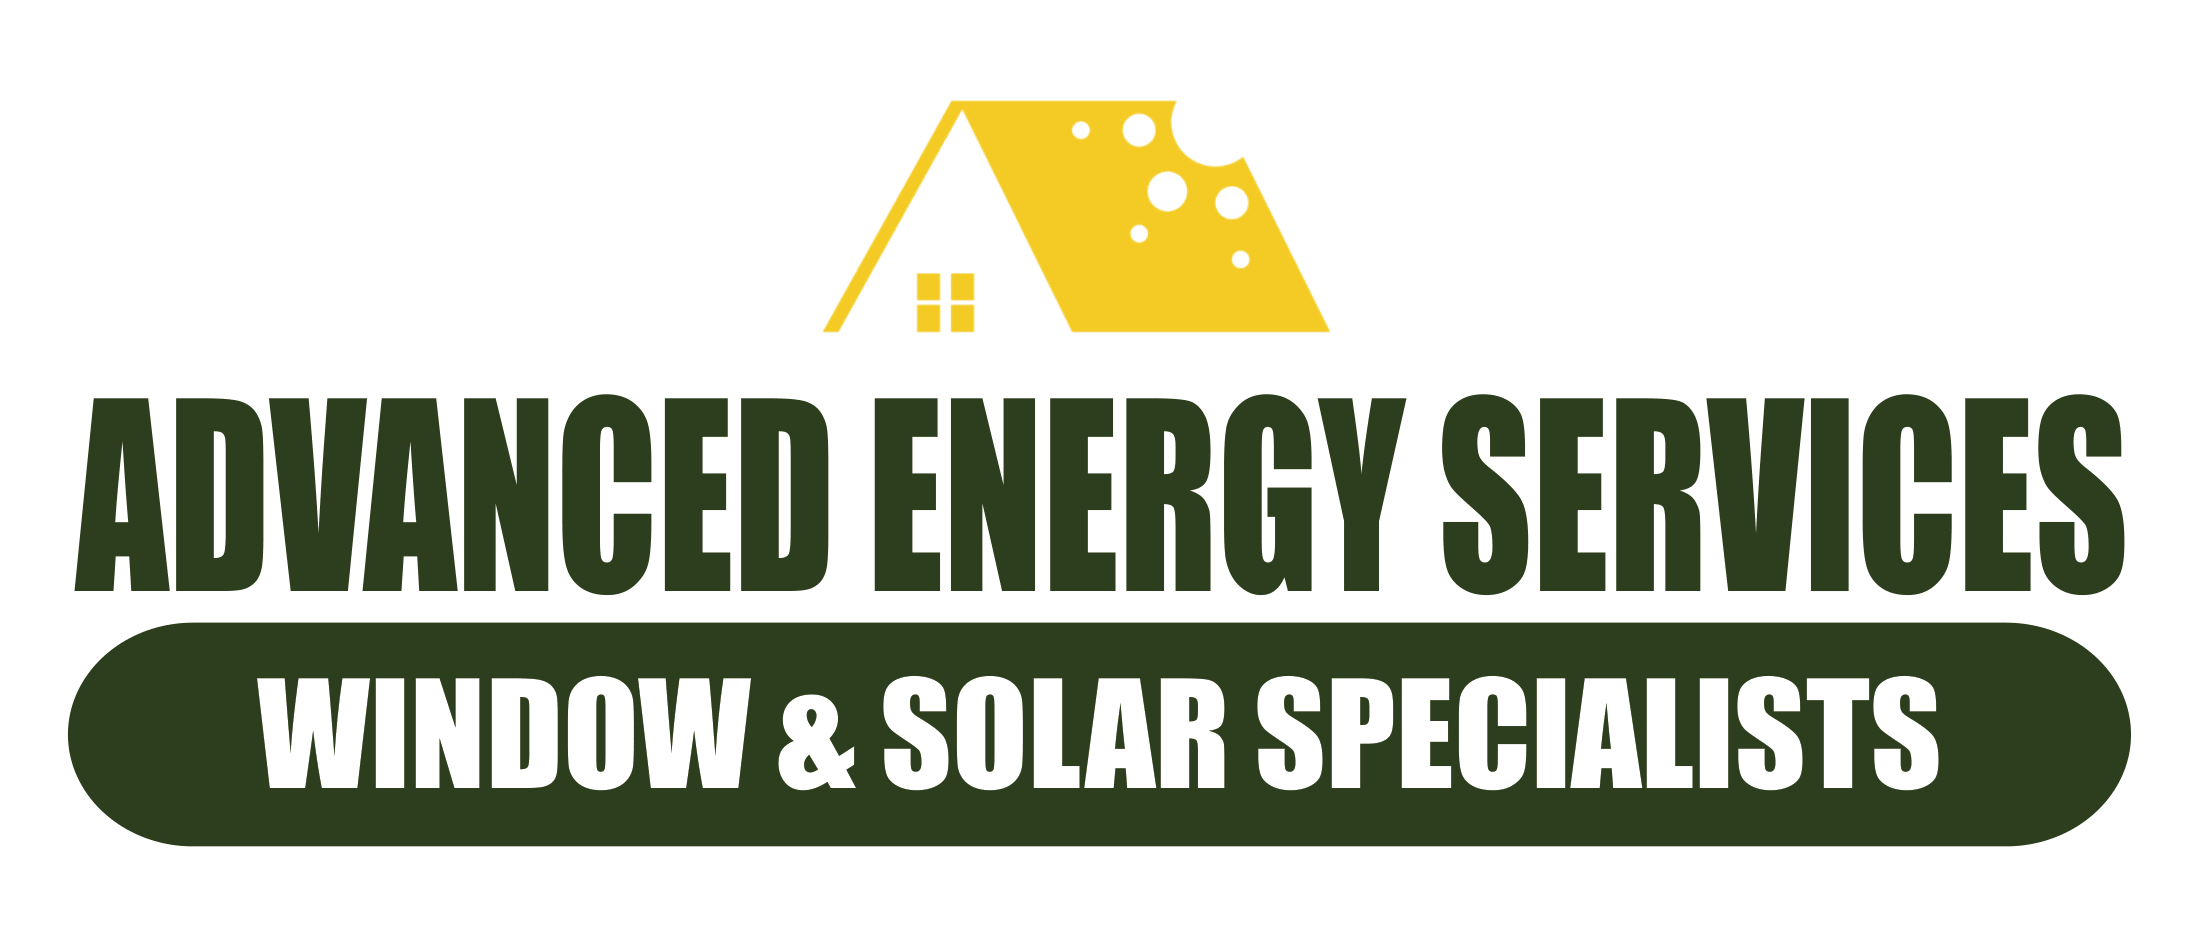 Advanced Energy Services | Window & Solar Specialists